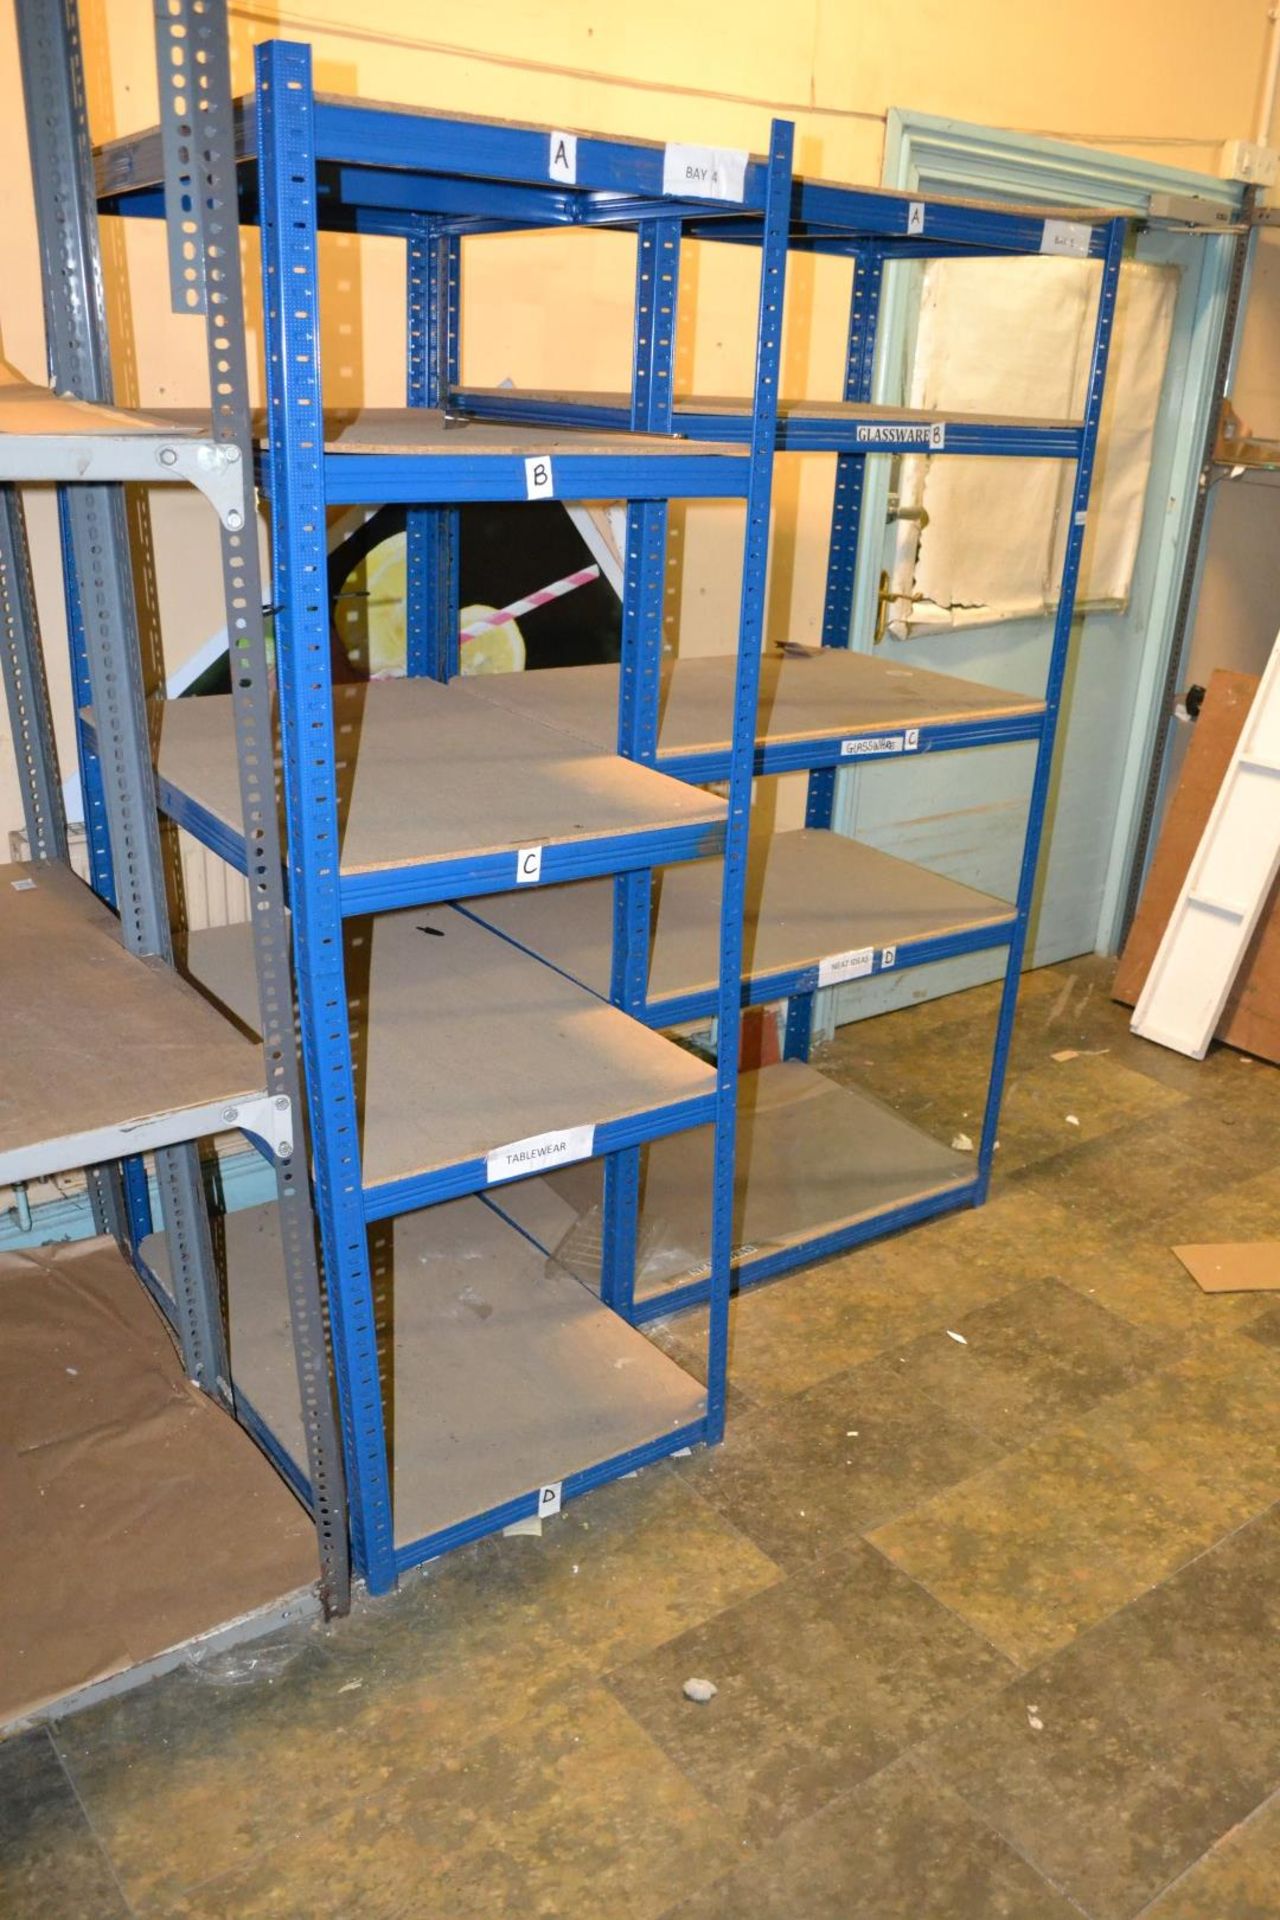 9 x Various Pieces of Steel Shelving - Various Sizes Included - BB GF PTP - CL351 - Location: